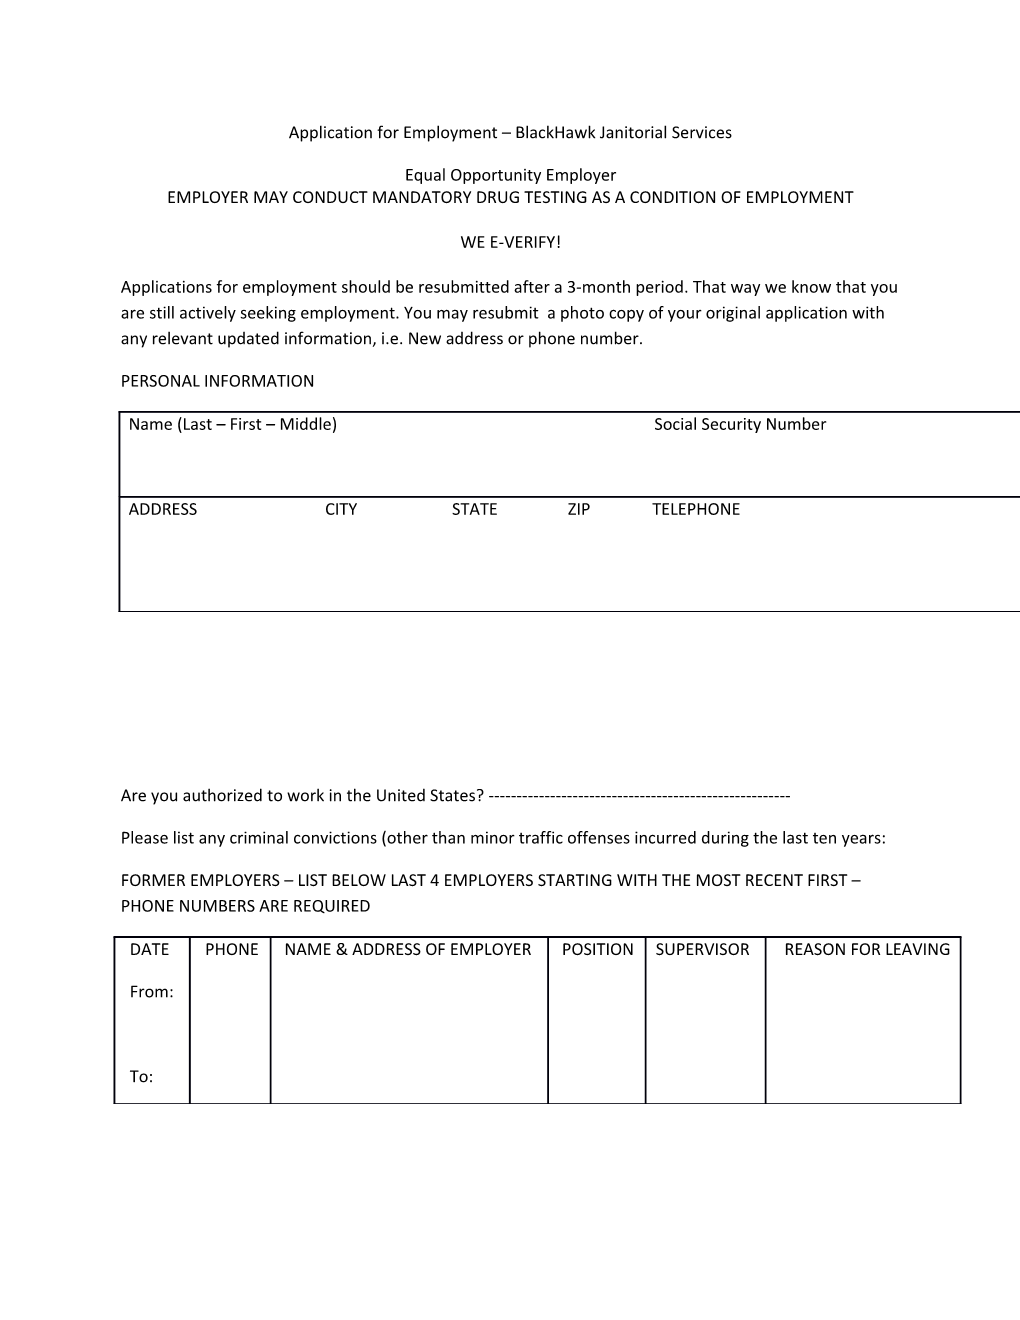 Application for Employment Blackhawk Janitorial Services